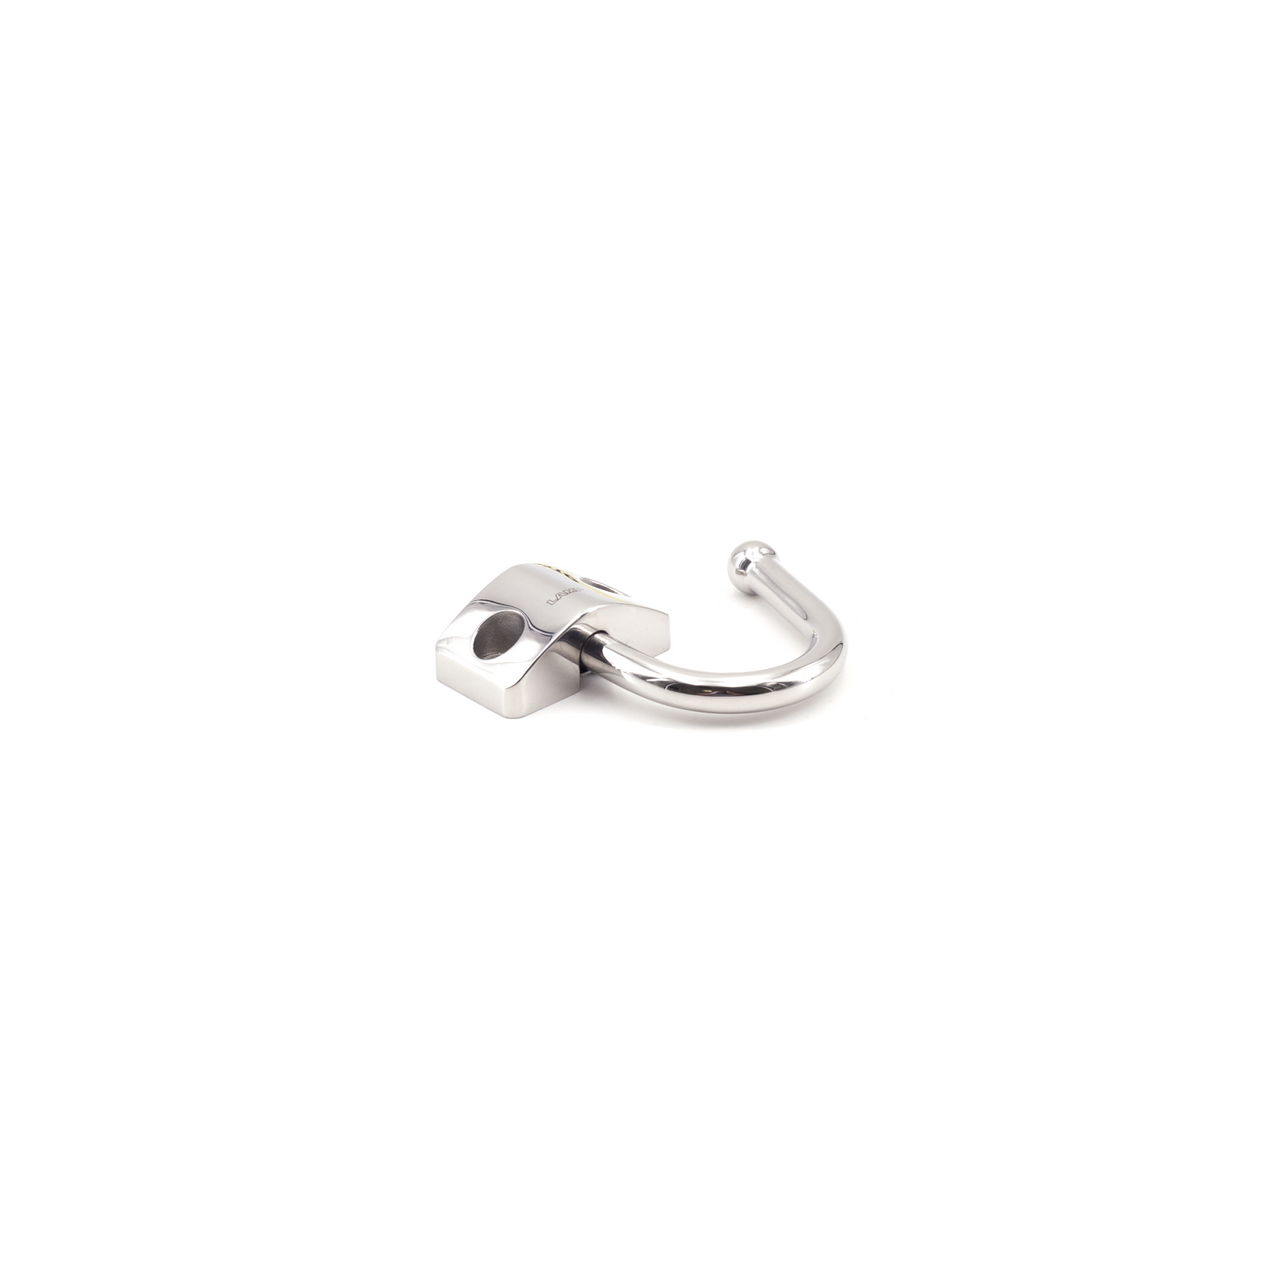 Large Single Stainless Steel S Hook